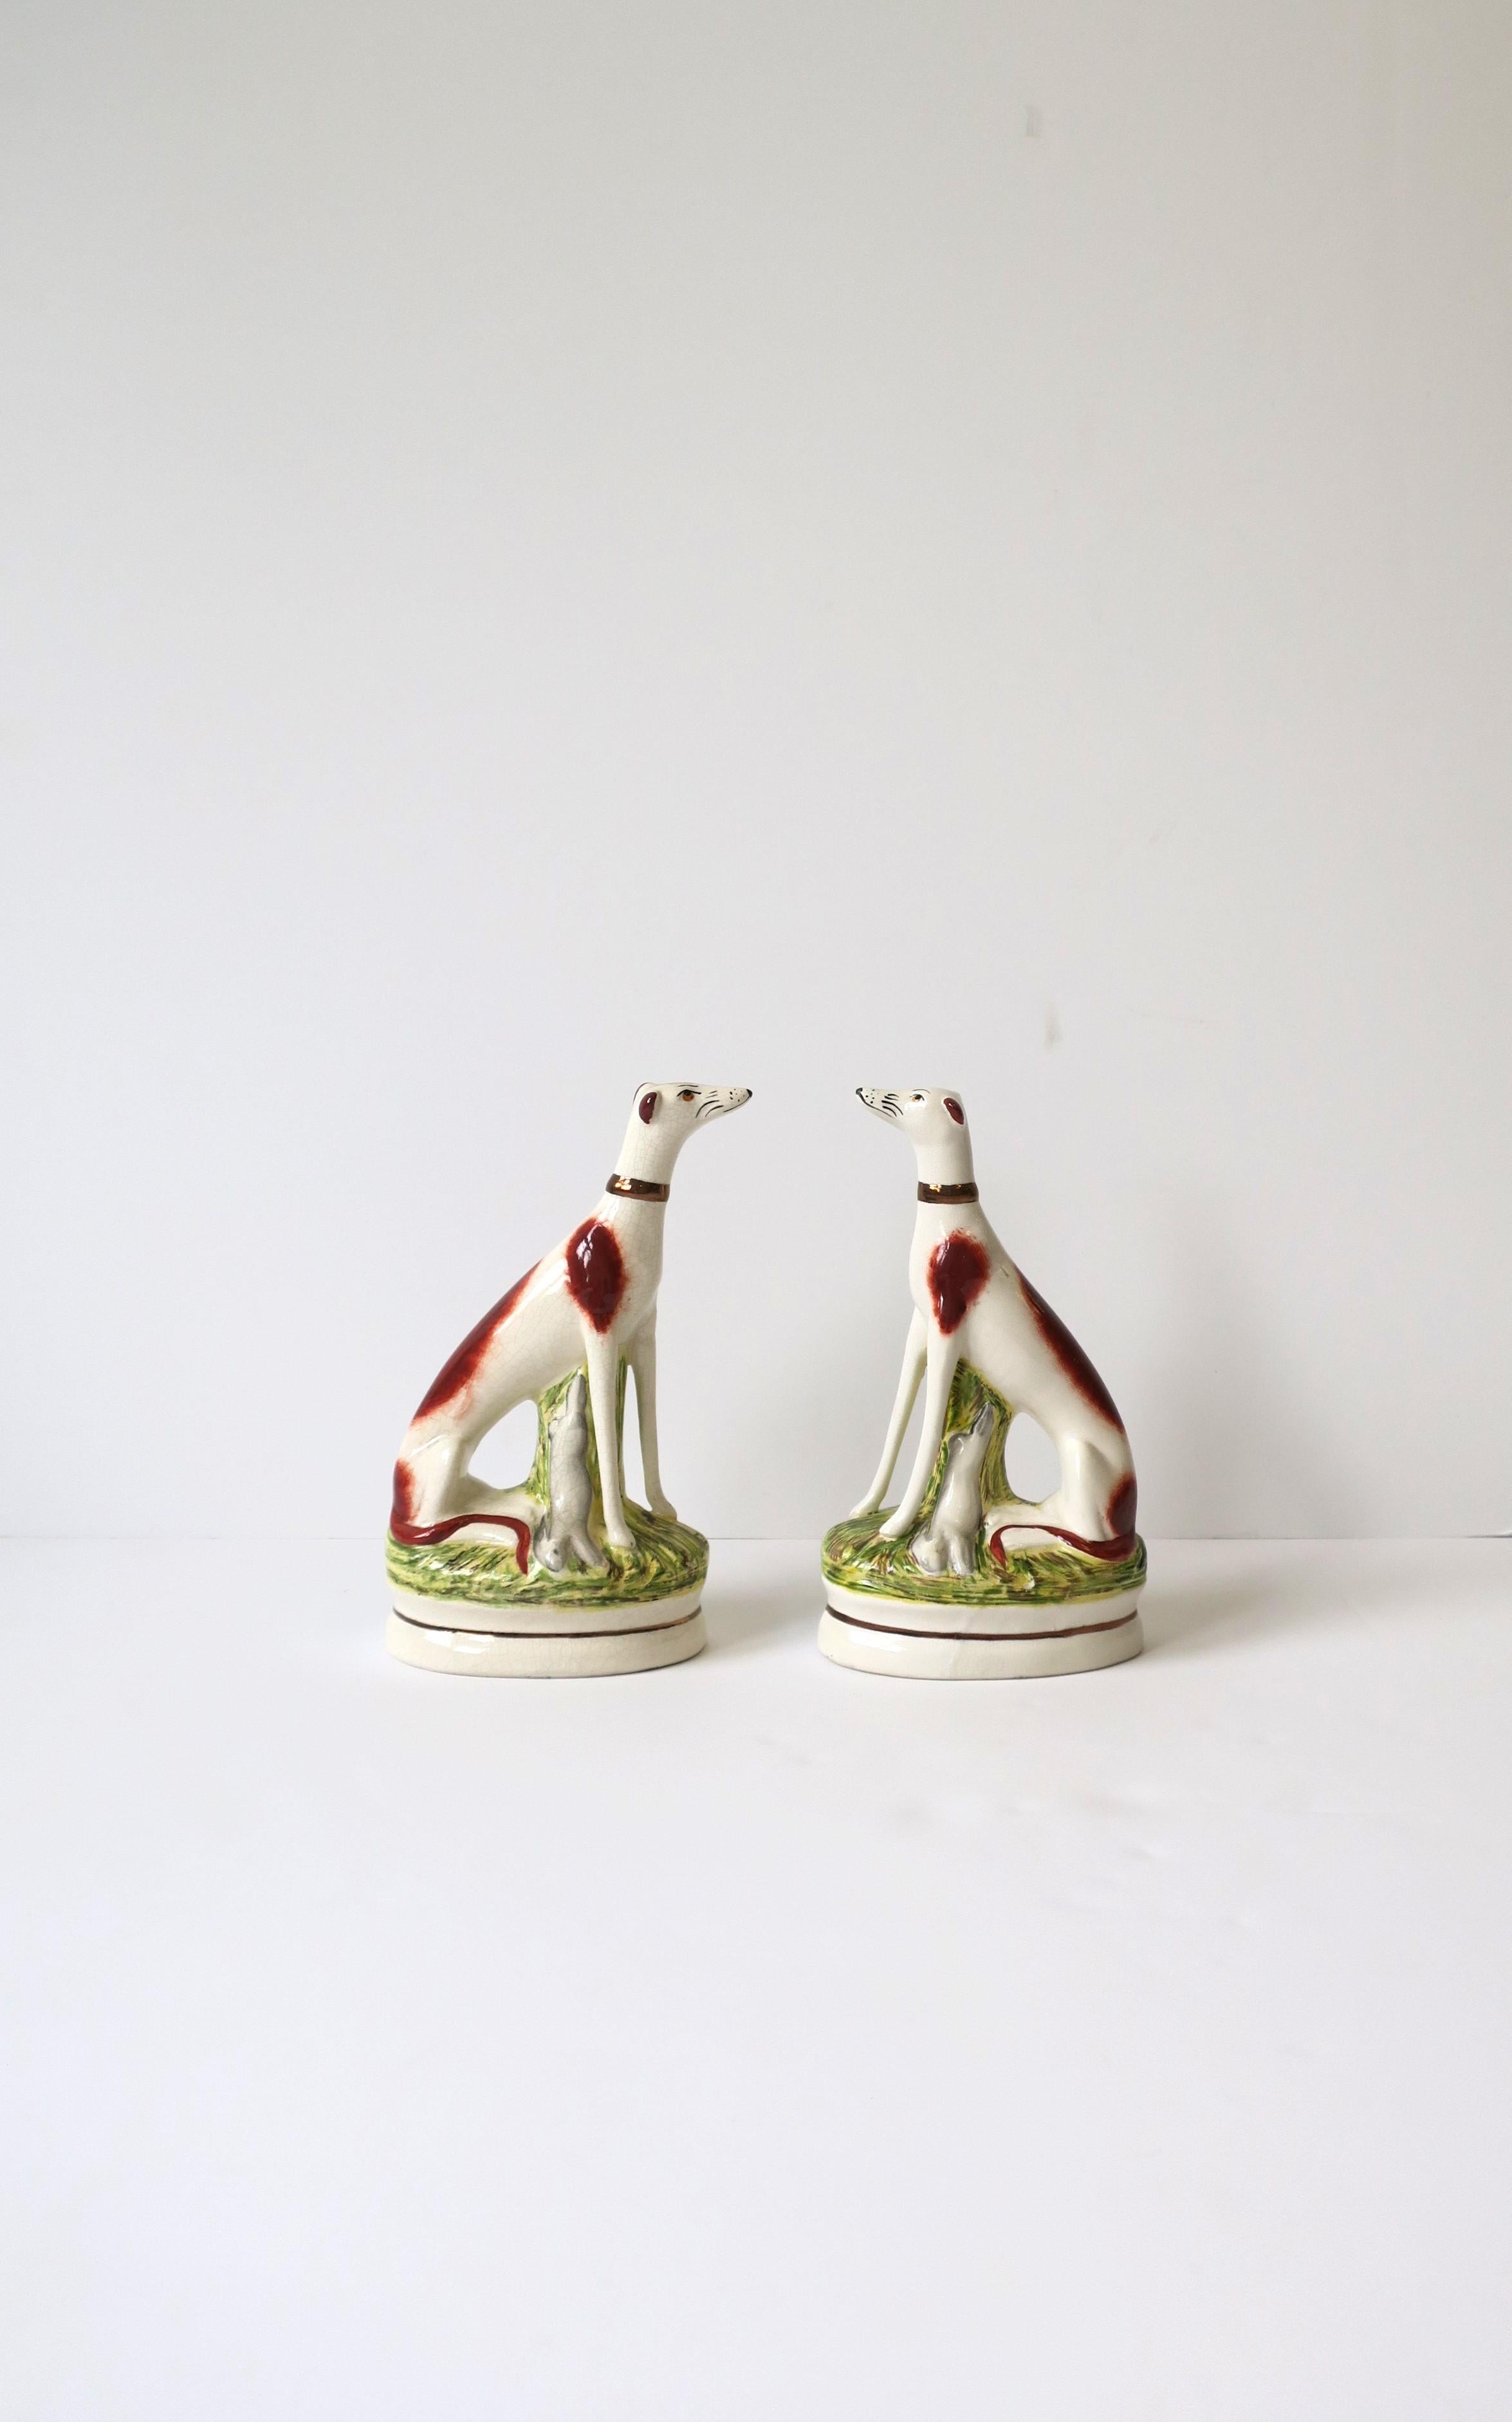 A beautiful regal pair of English Staffordshire dog bookends or decorative objects, circa late-20th century, England. Dogs' have great facial detail and gold neck collars sitting in a garden with their rabbit catch. 

Dimensions: 9.25